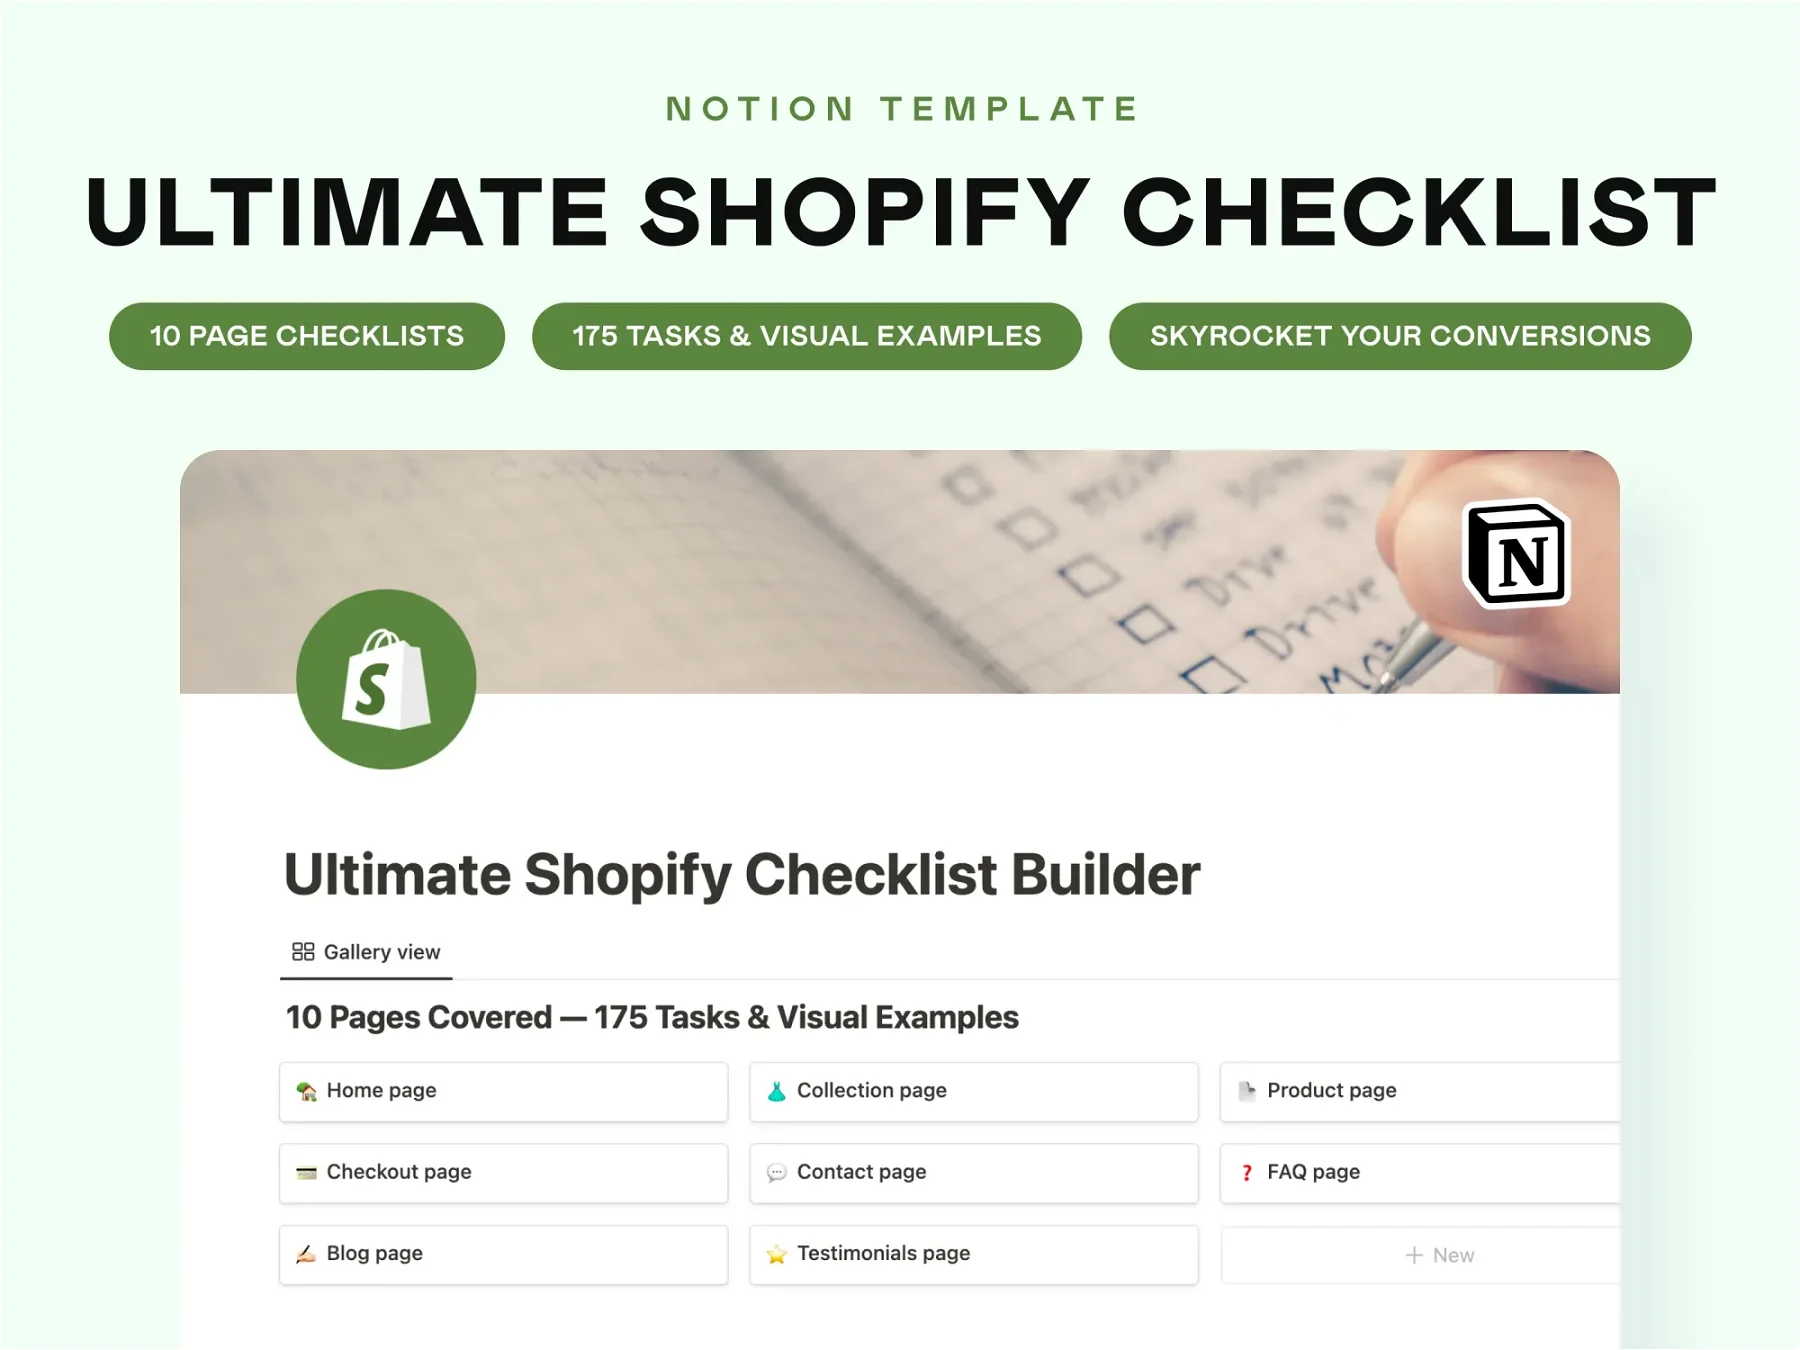 Ultimate Shopify Checklist Builder | How to Sell on Shopify | E-commerce Store Seller Help | Business Online Selling Guide